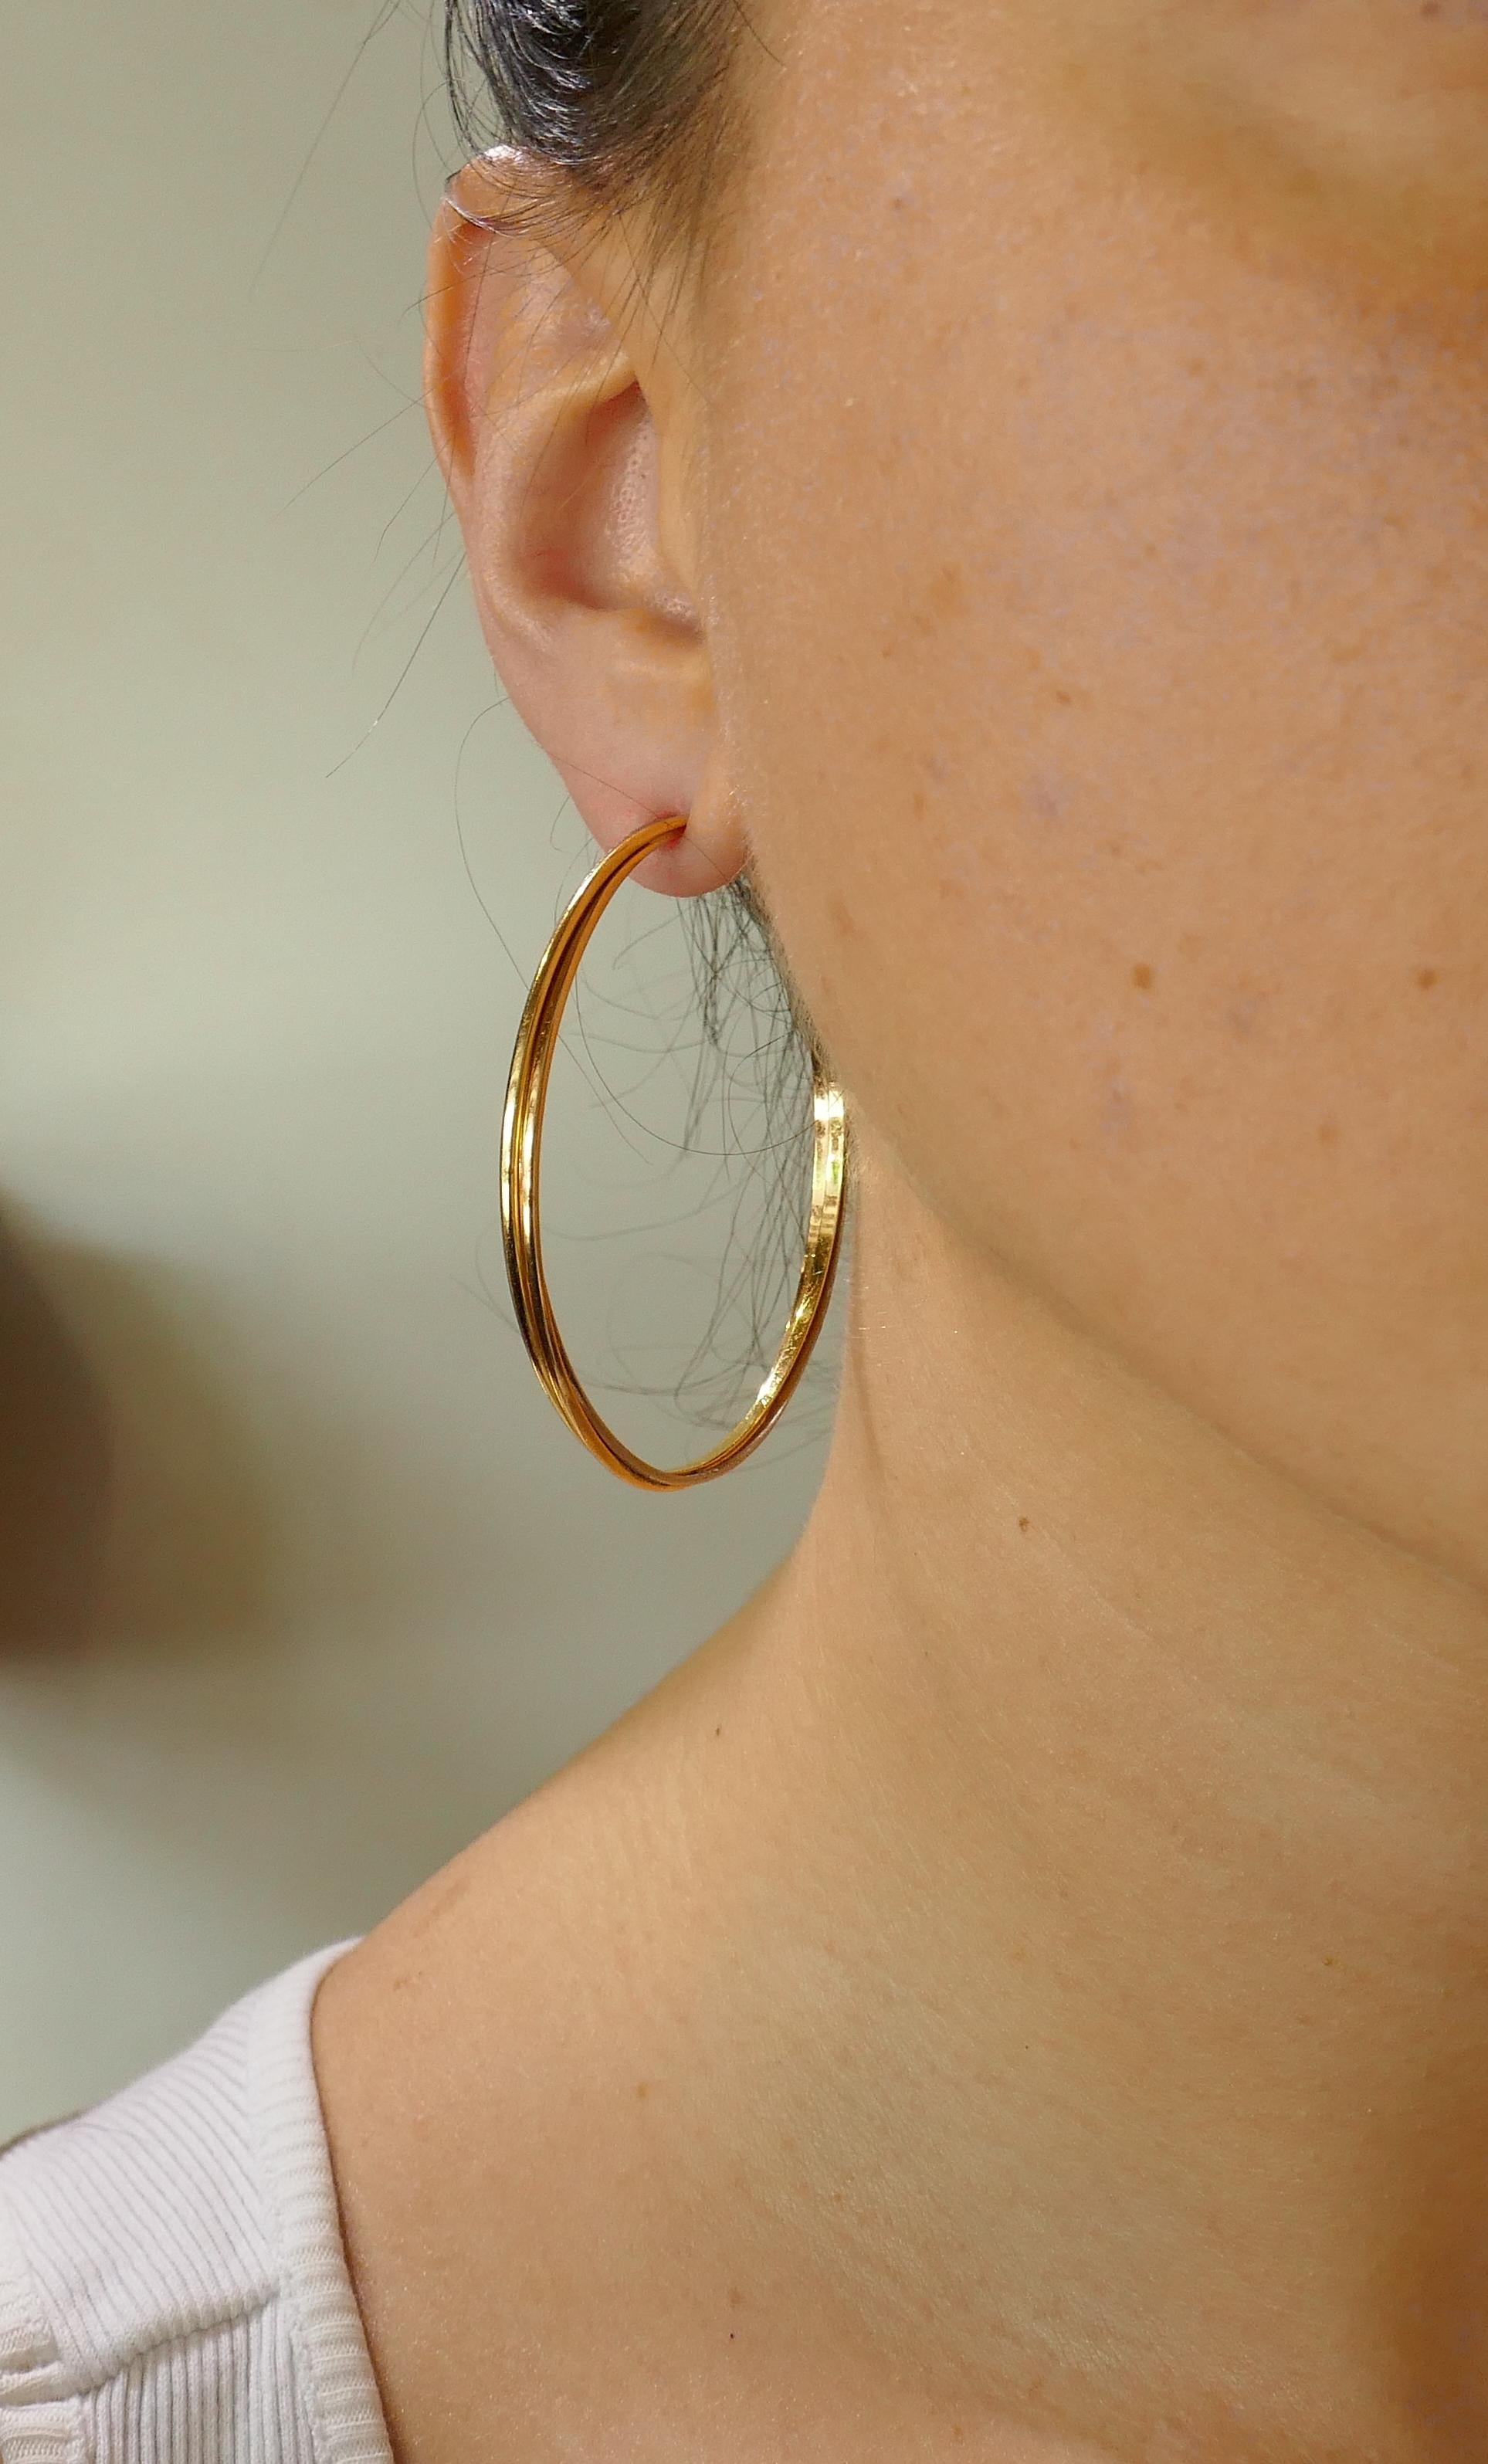 Chic and wearable Trinity hoop earrings that are a 